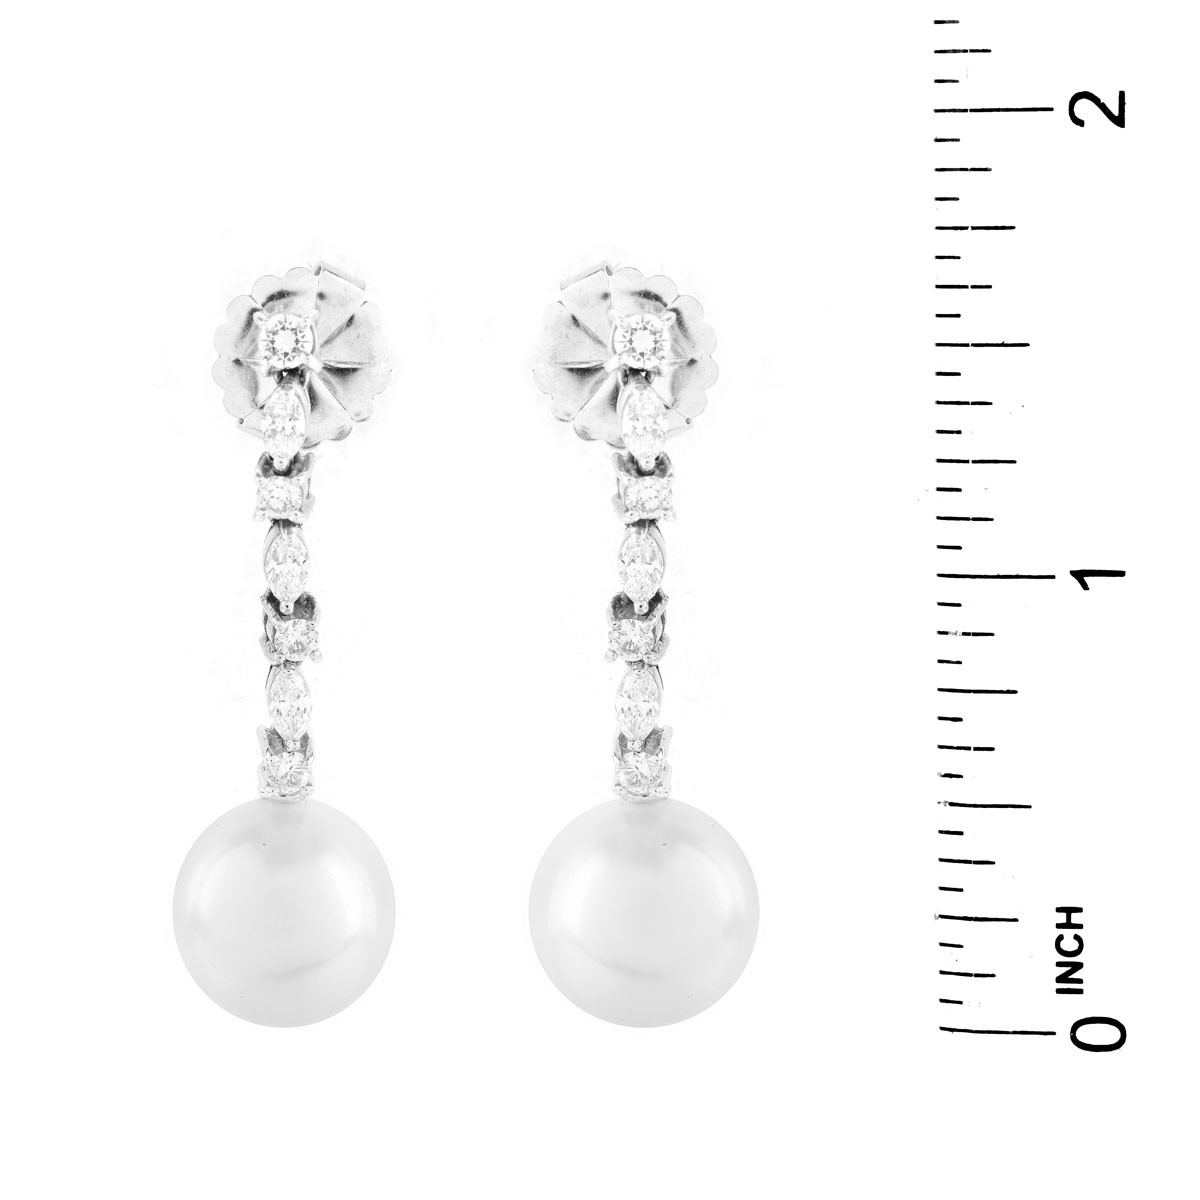 12.5mm South Sea Pearl, 1.25 Carat Marquise and Round Brilliant Cut Diamond and 14 Karat White Gold Pendant Earrings. Pearls with good polis and luster.